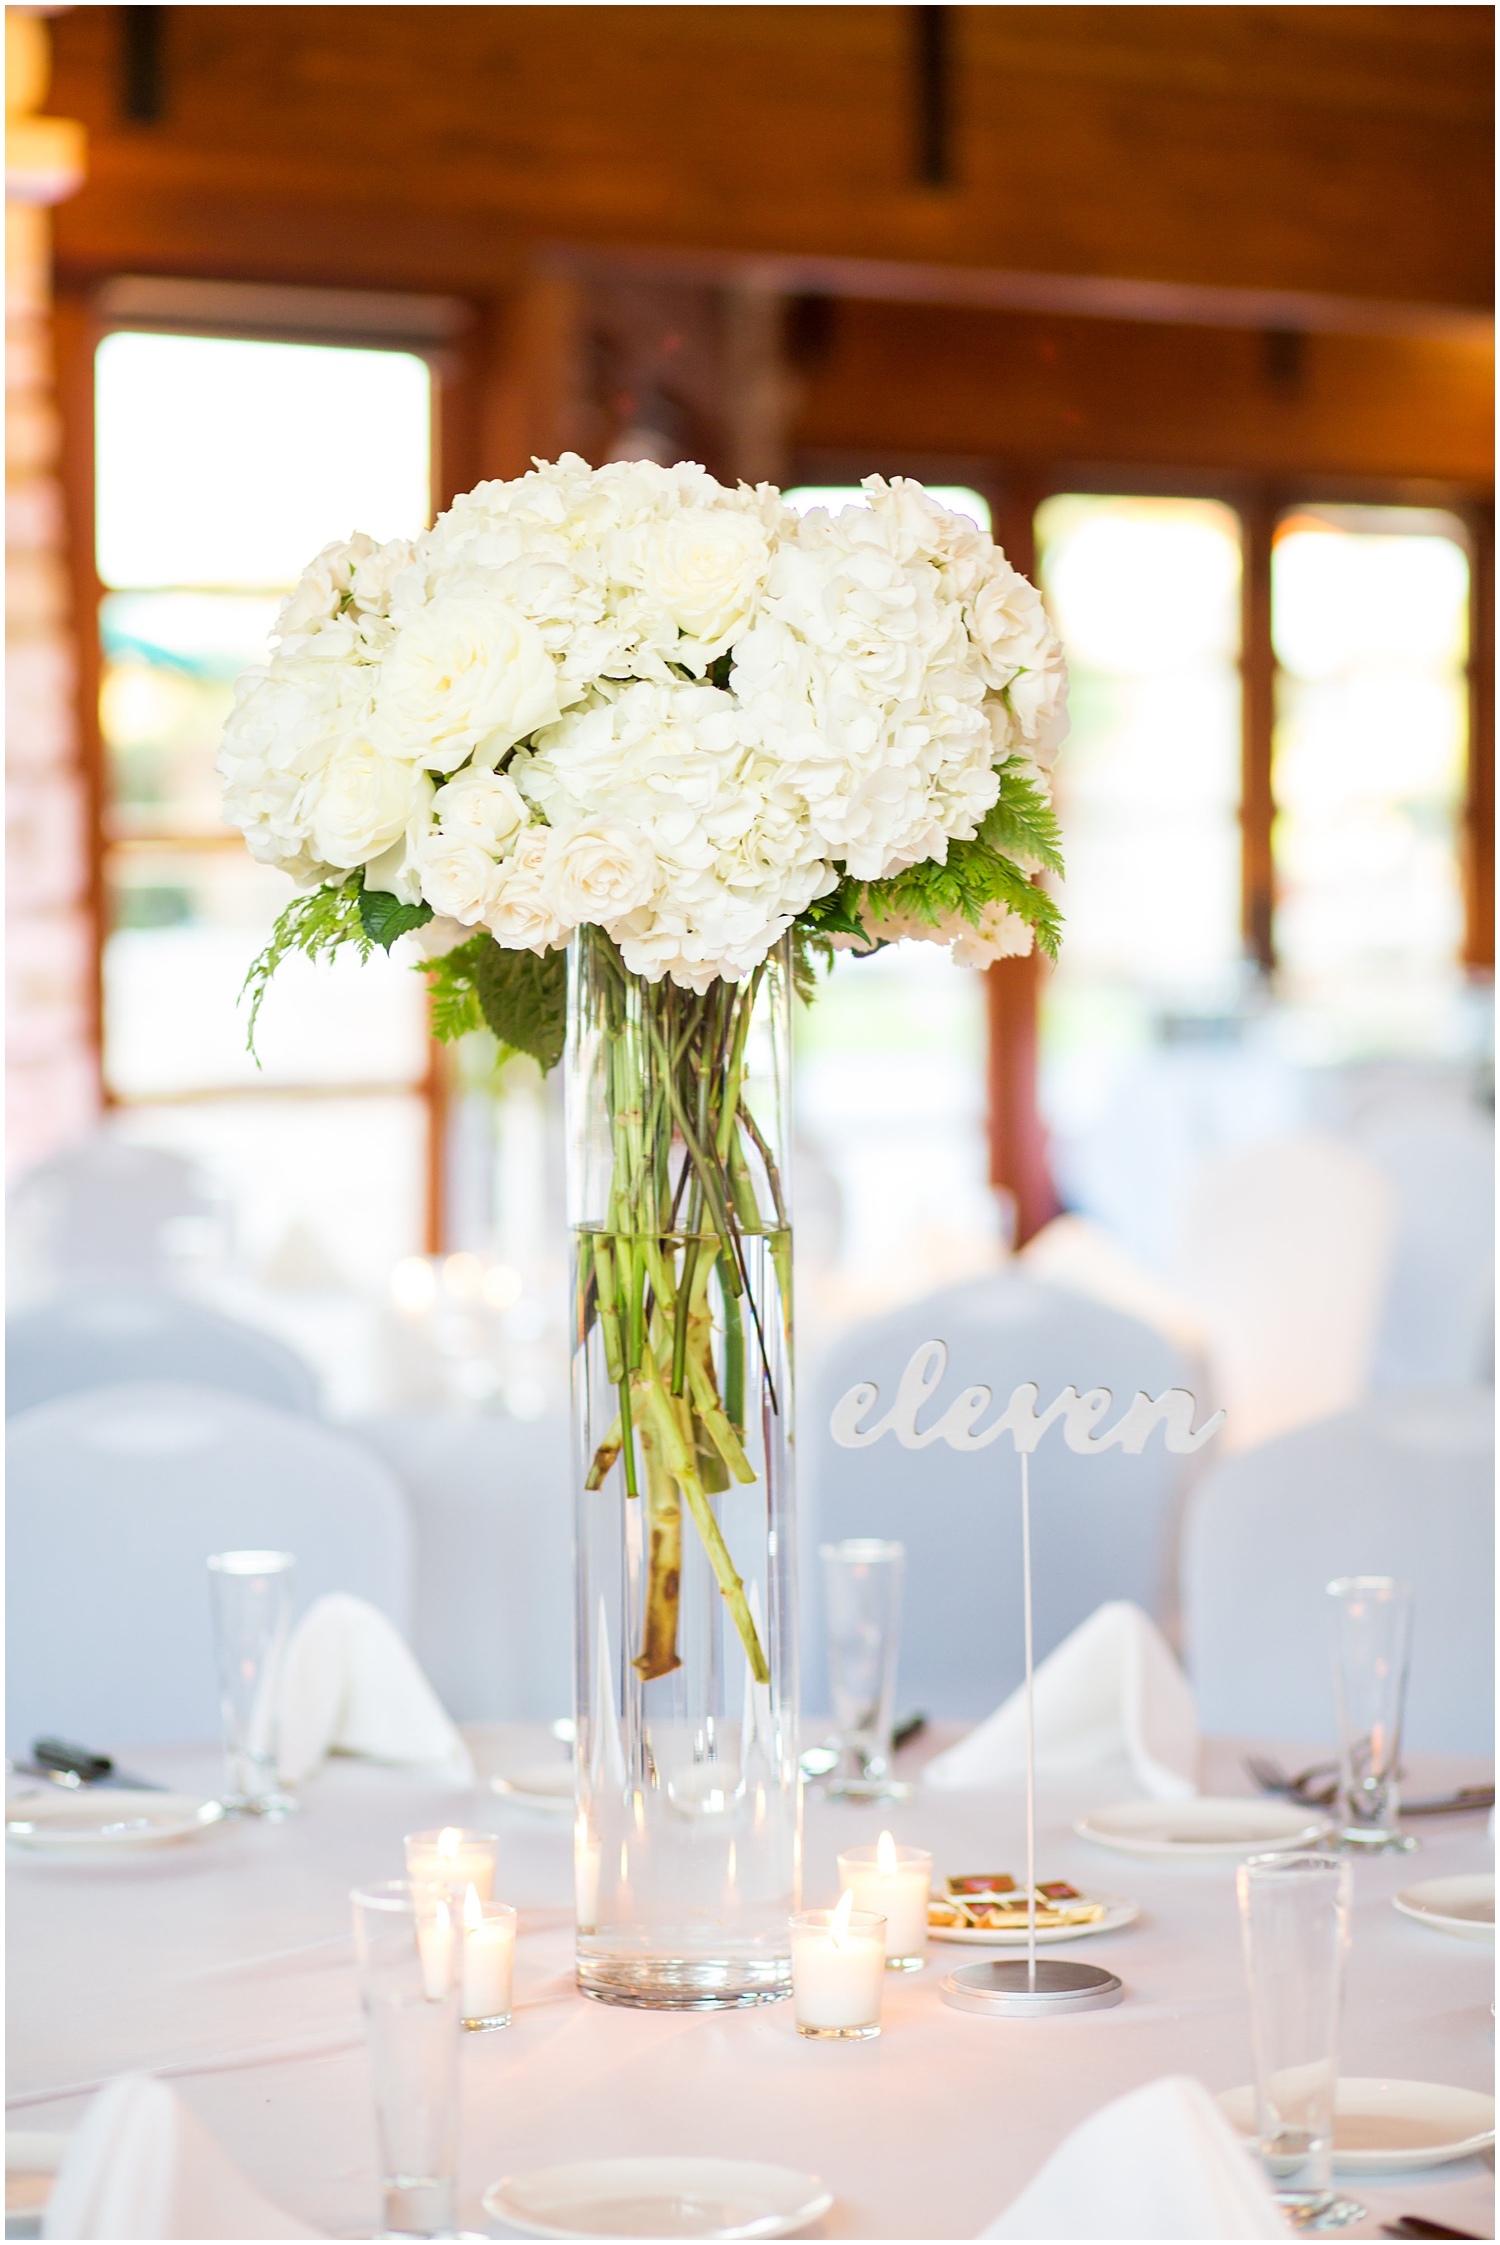 white hydrangeas and white table number wedding day reception details